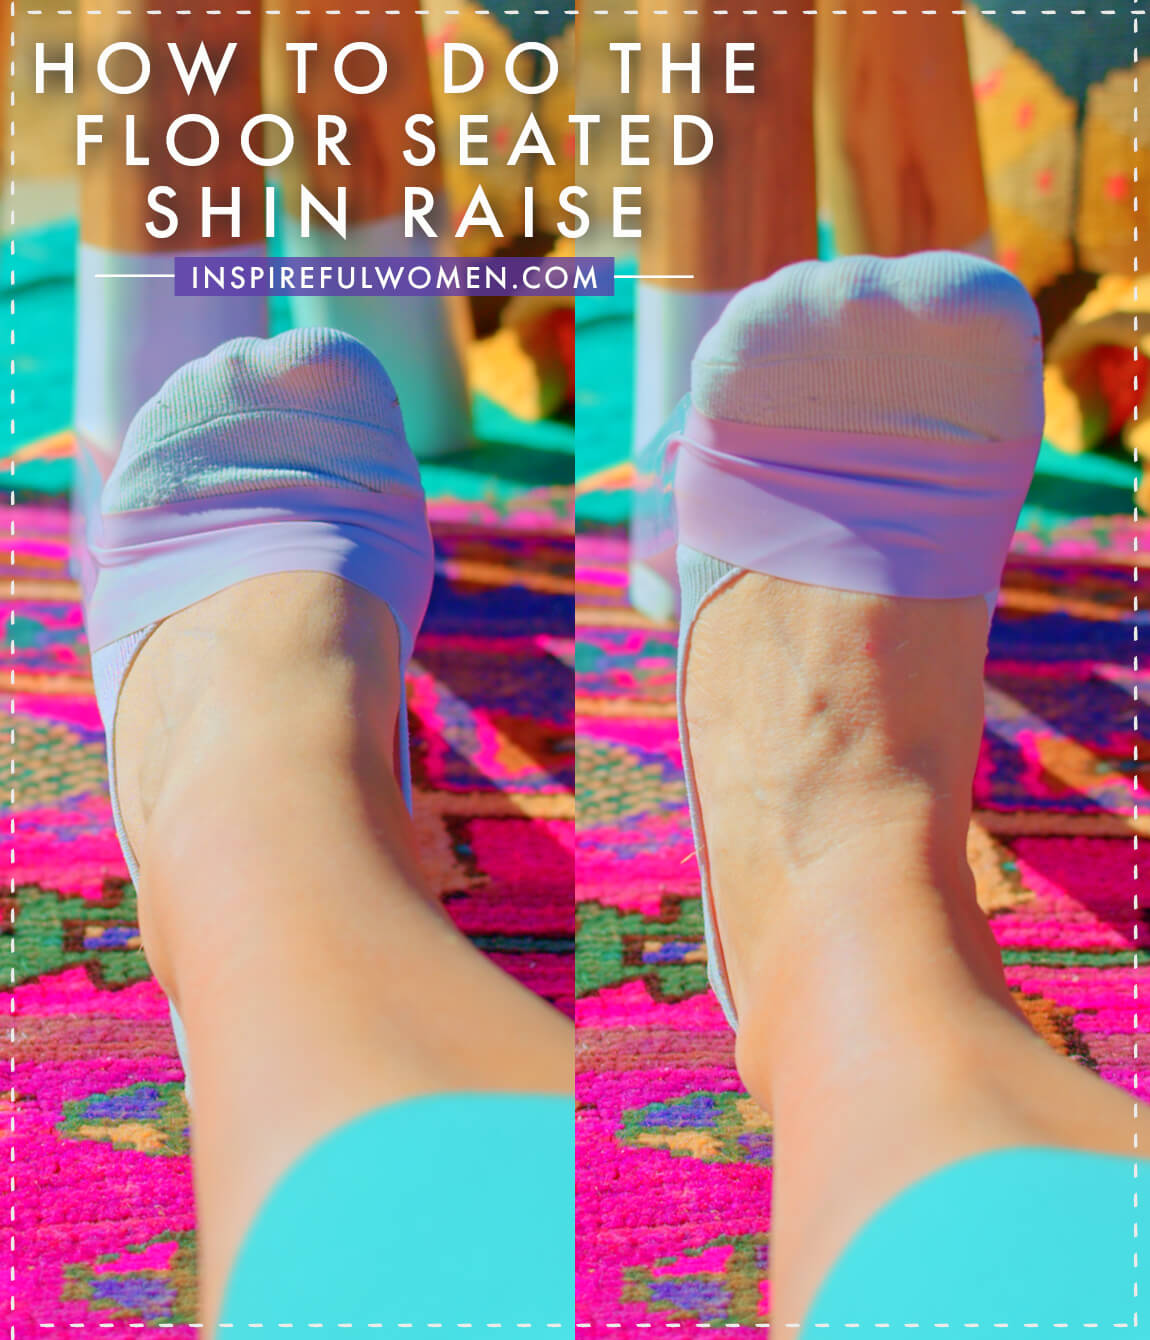 how-to-seated-on-floor-banded-shin-raises-ankle-dorsiflexion-tibialis-anterior-exercise-proper-form